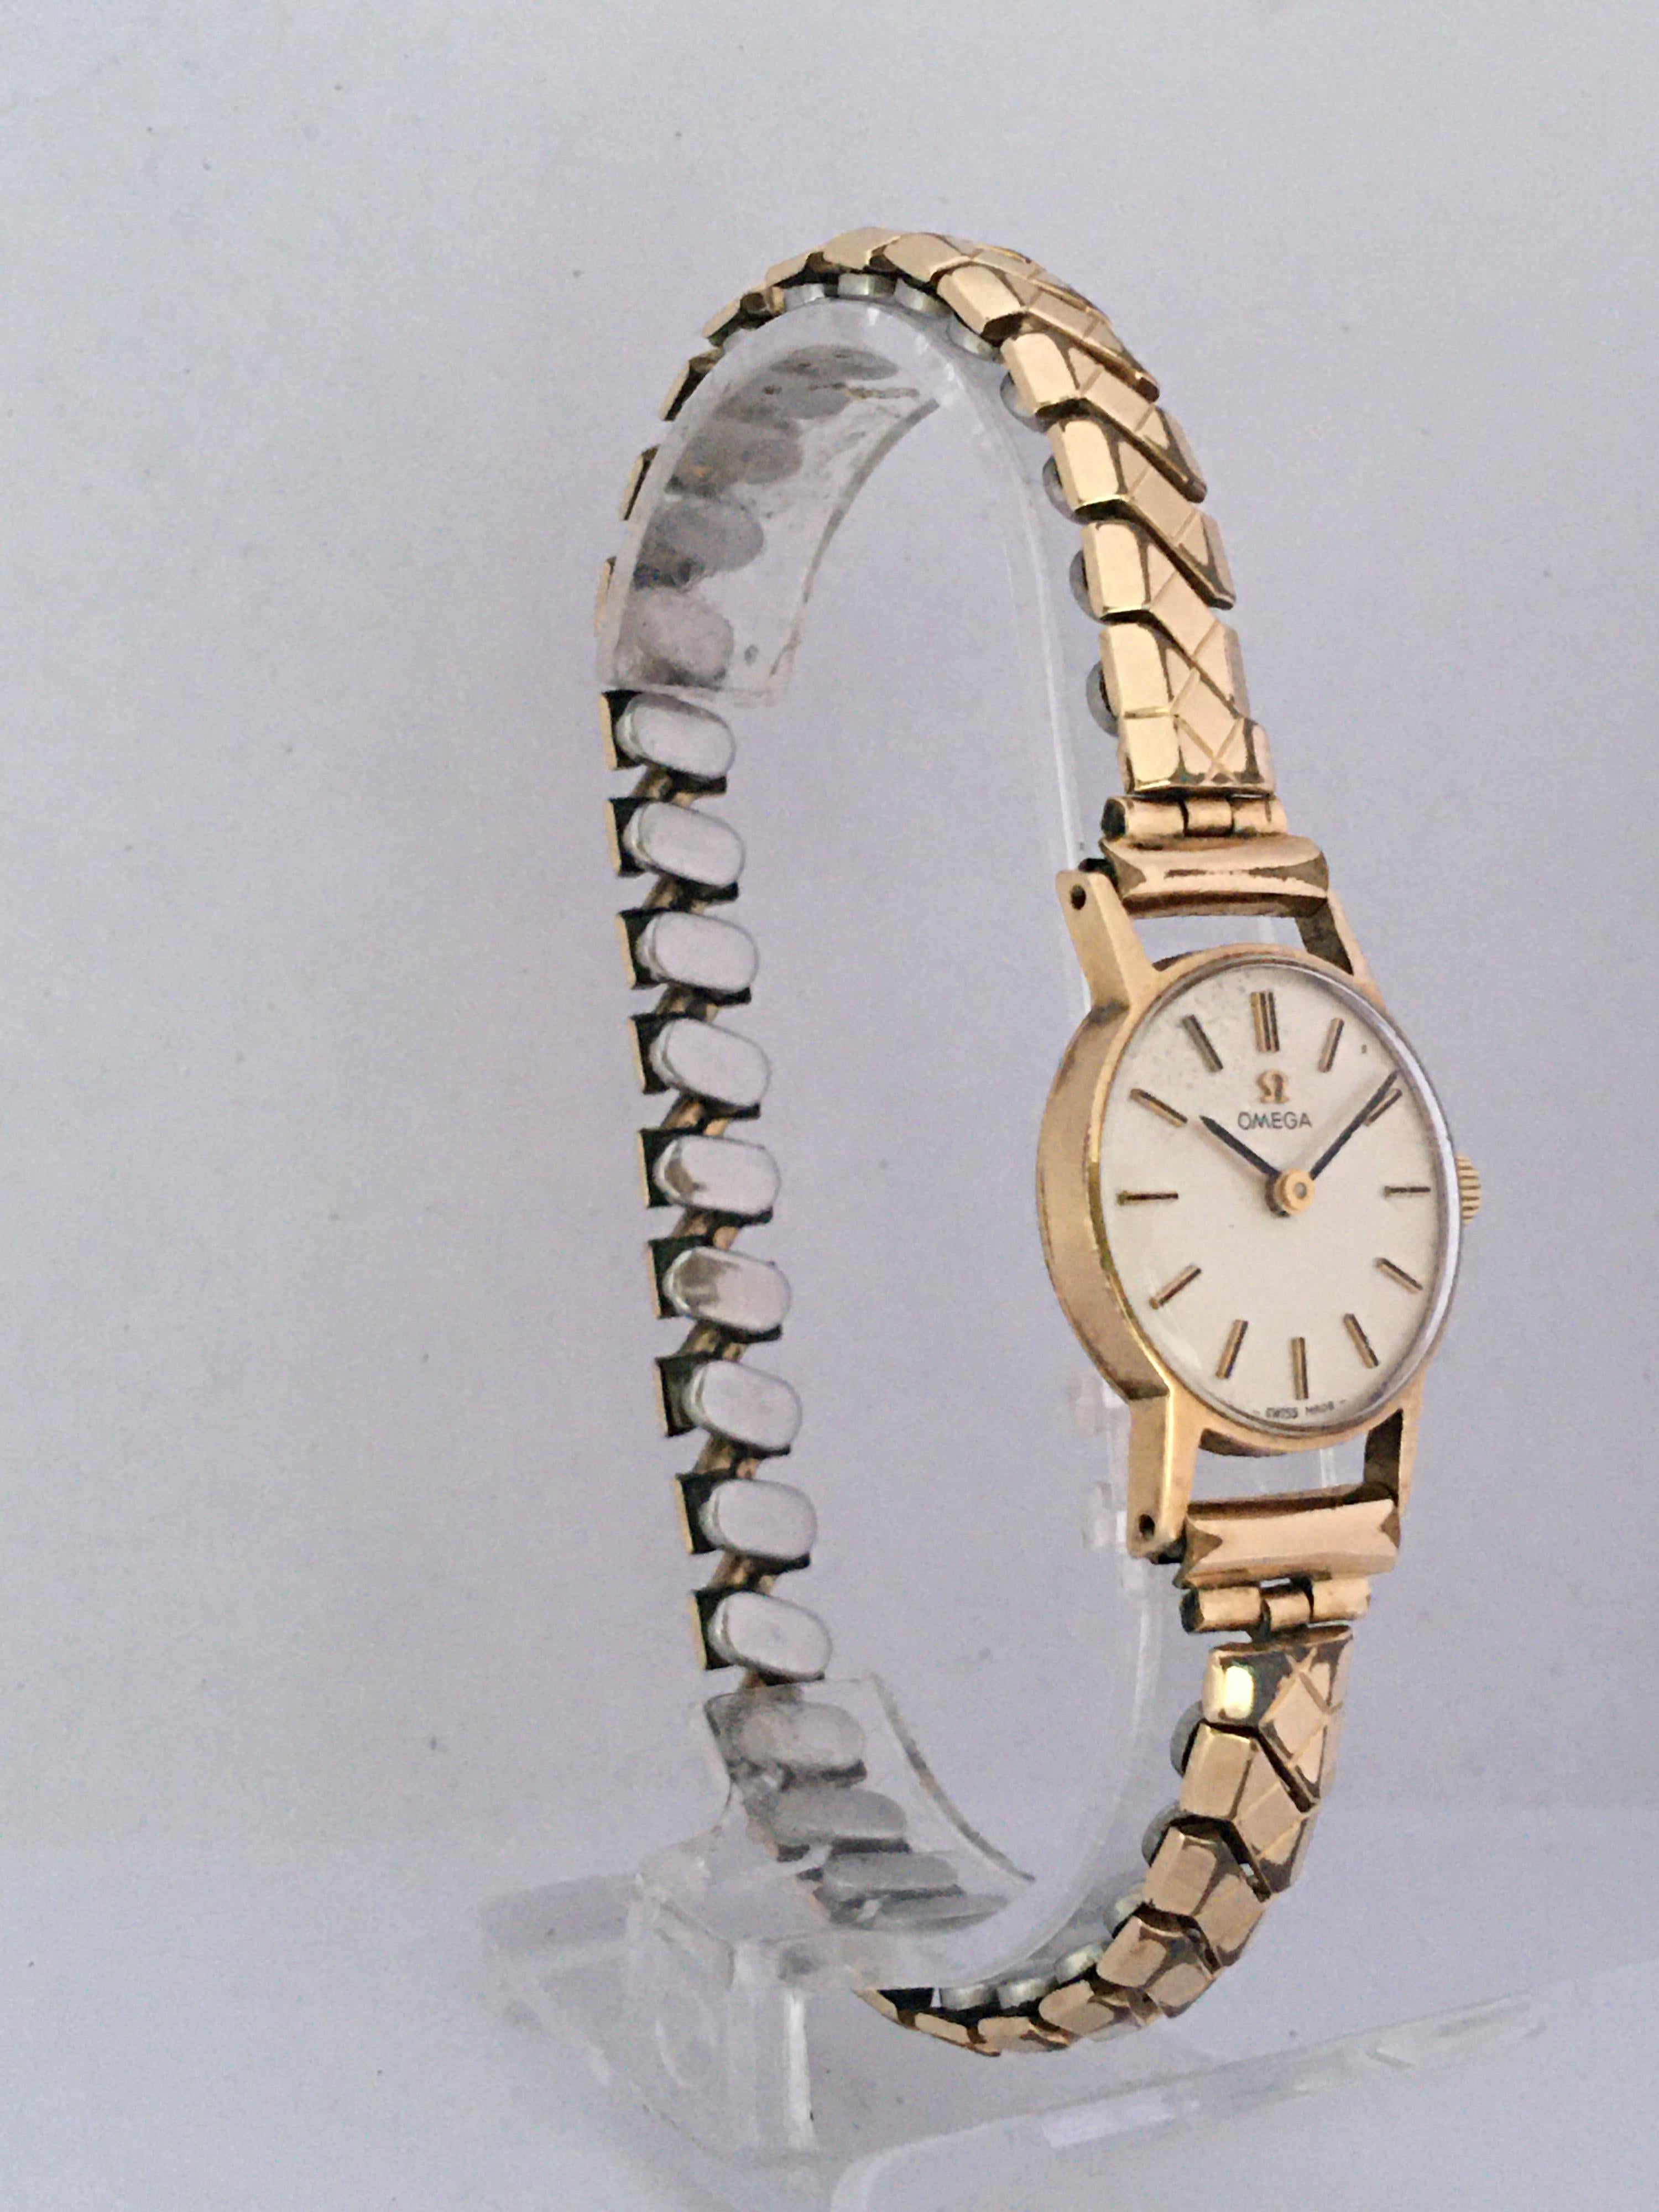 Omega 9ct lady's bracelet watch, Birmingham 1964, serial no. 221316xx, circular silvered dial with baton markers, signed cal. 620 17 jewel adjusted two positions signed Dennision case, gold plated expanding bracelet, 16.5gm, 19mm watch diameter.